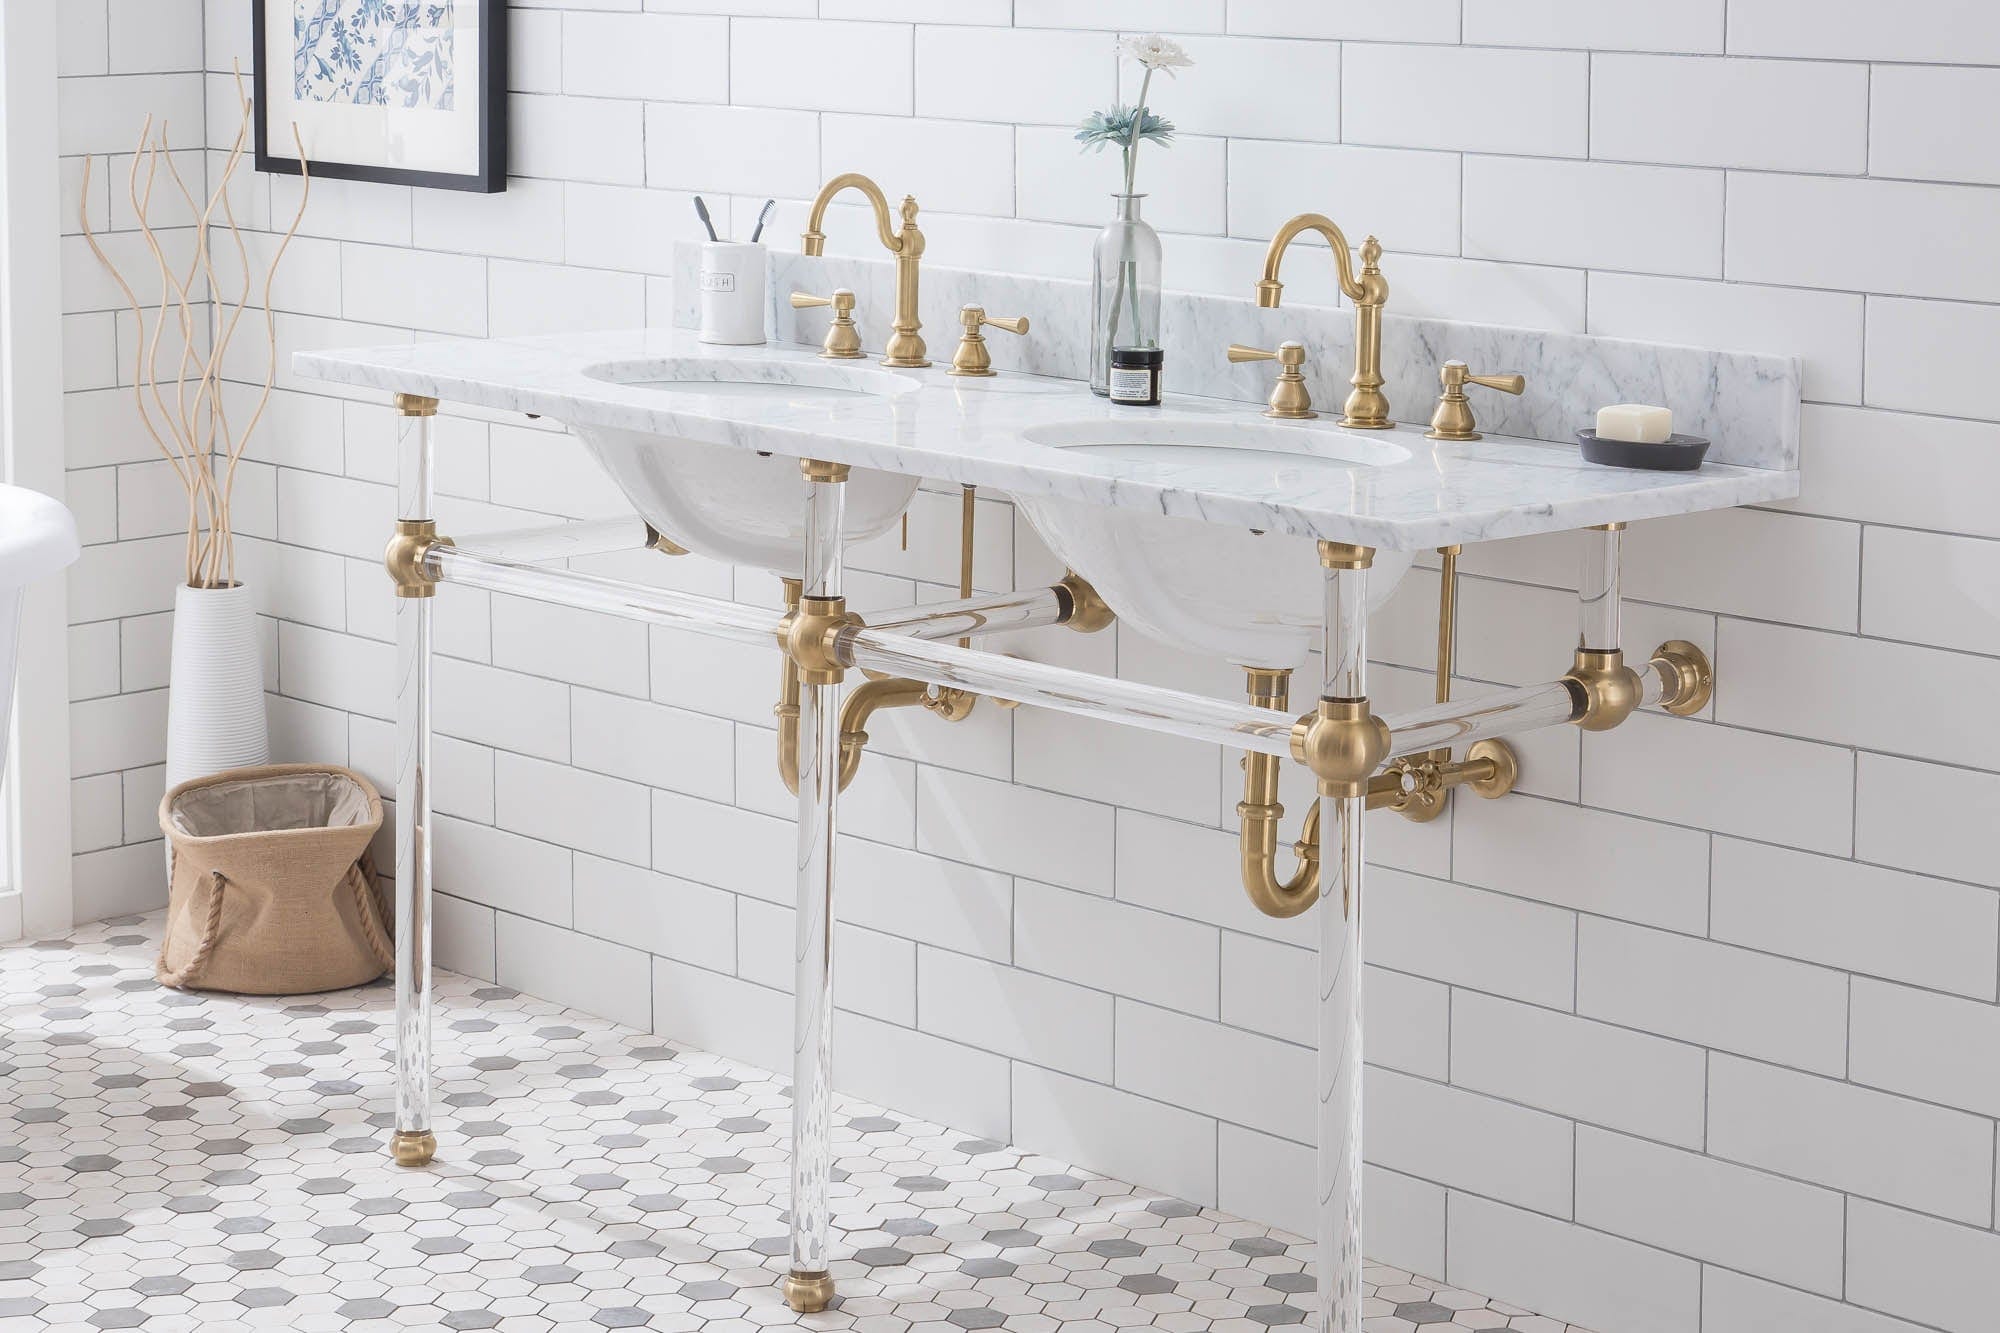 Empire 60 Inch Wide Double Wash Stand, P-Trap, and Counter Top with Basin included in Satin Gold Finish - Molaix732030762824EP60C-0600